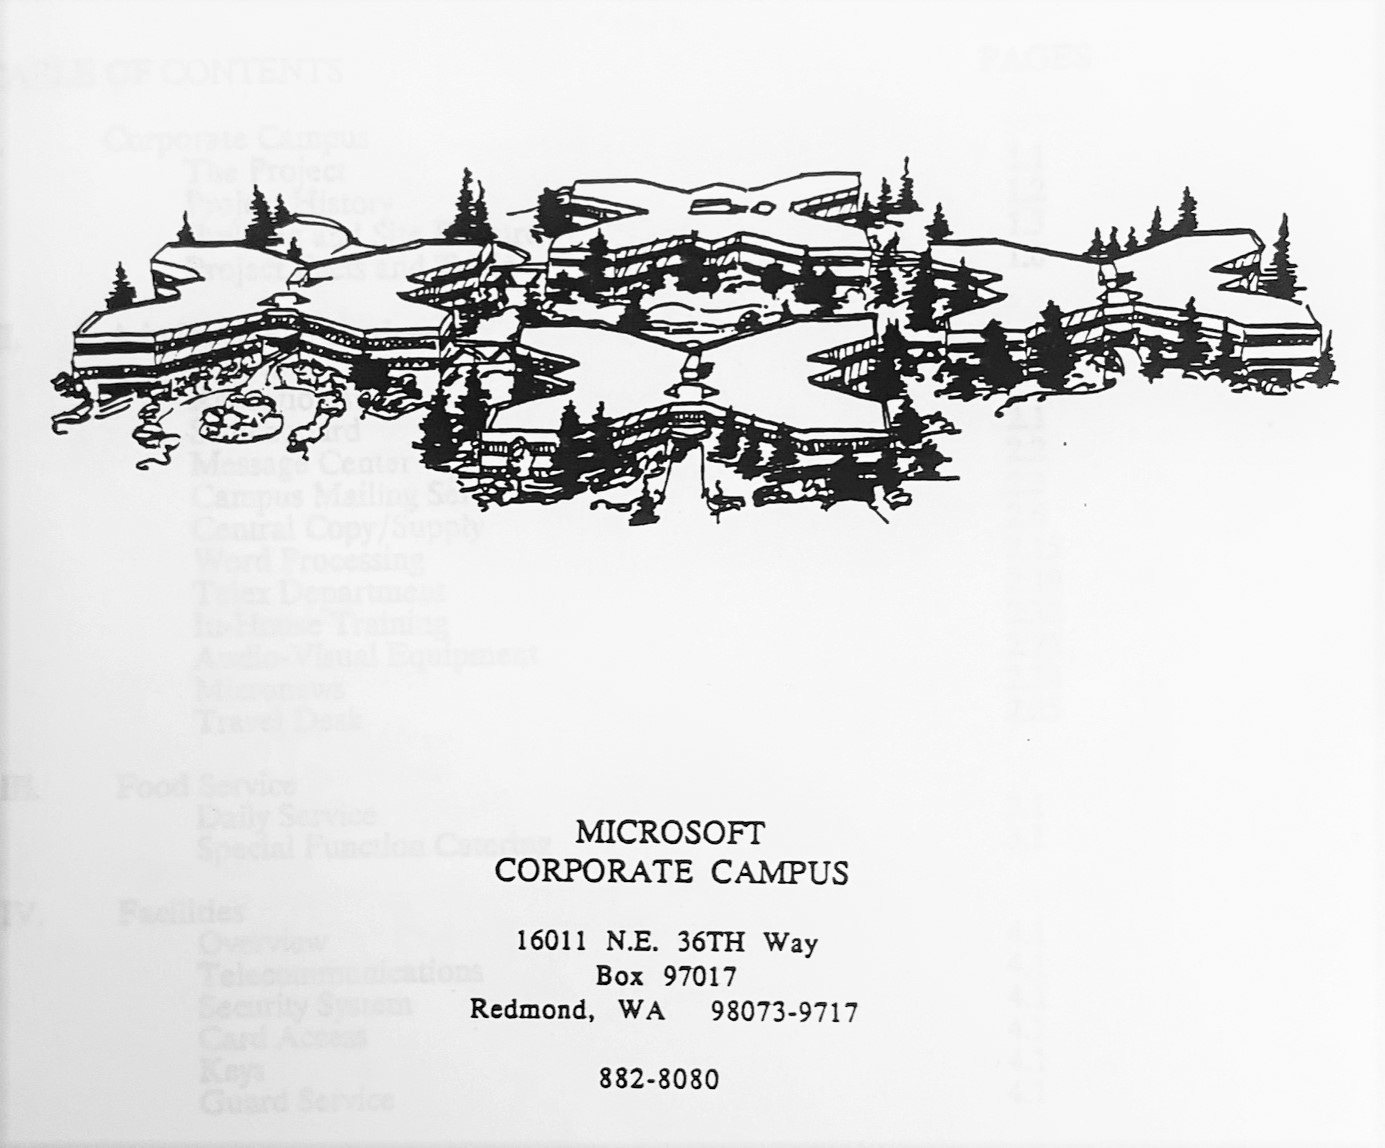 Photocopy of image of corporate campus showing 4 buildings.